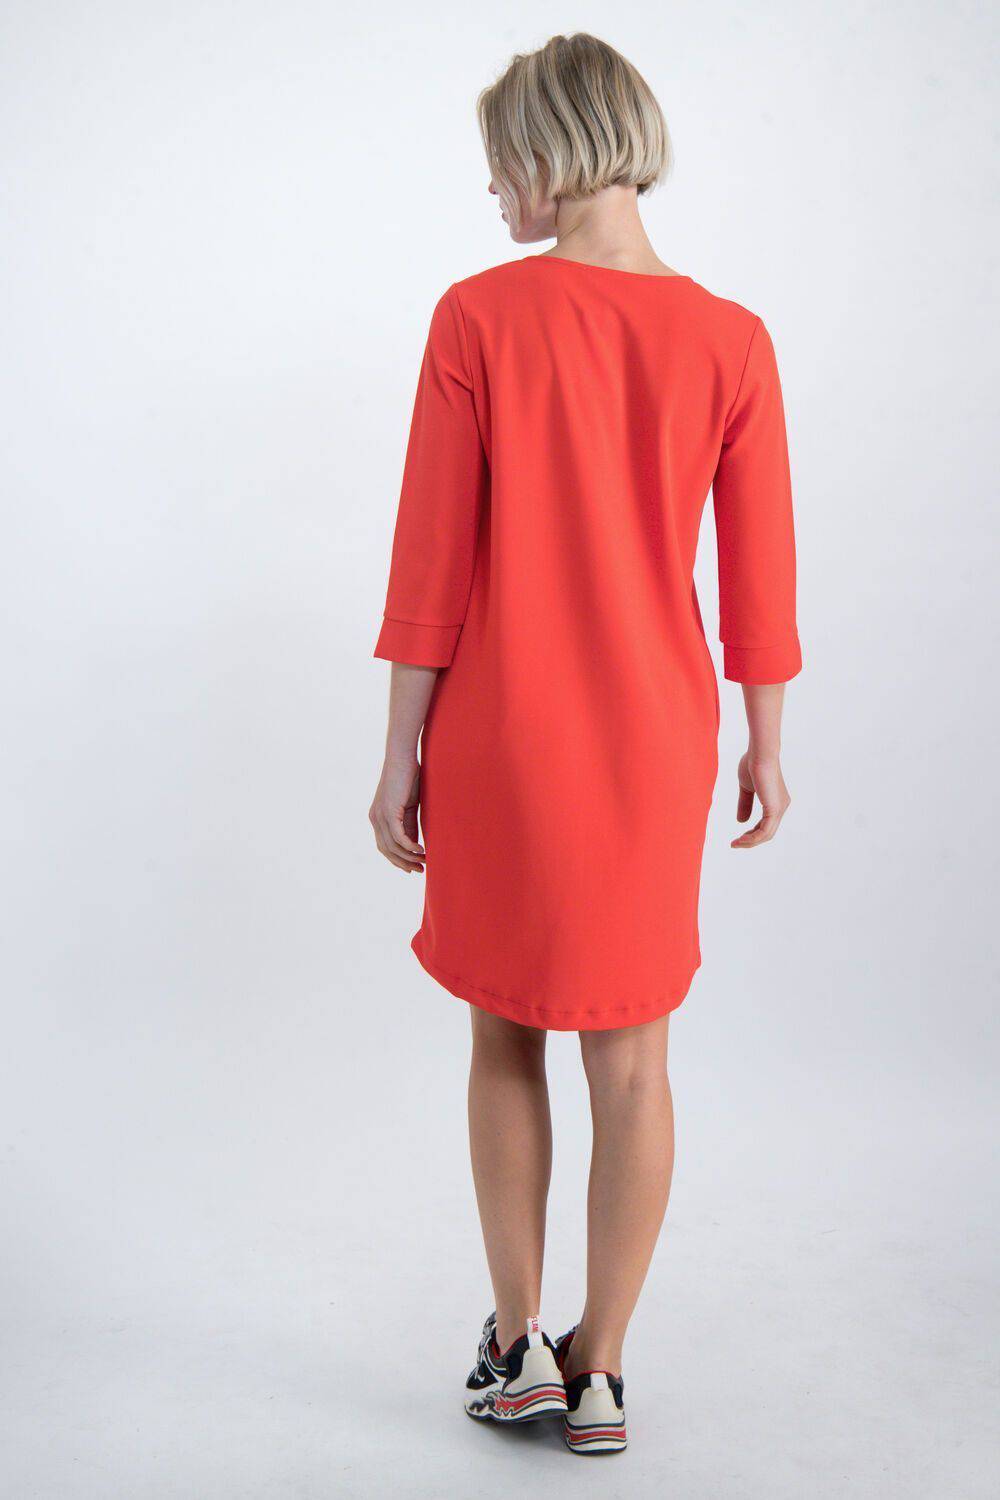 Poppy Red Garcia Dress - Your Style Your Story